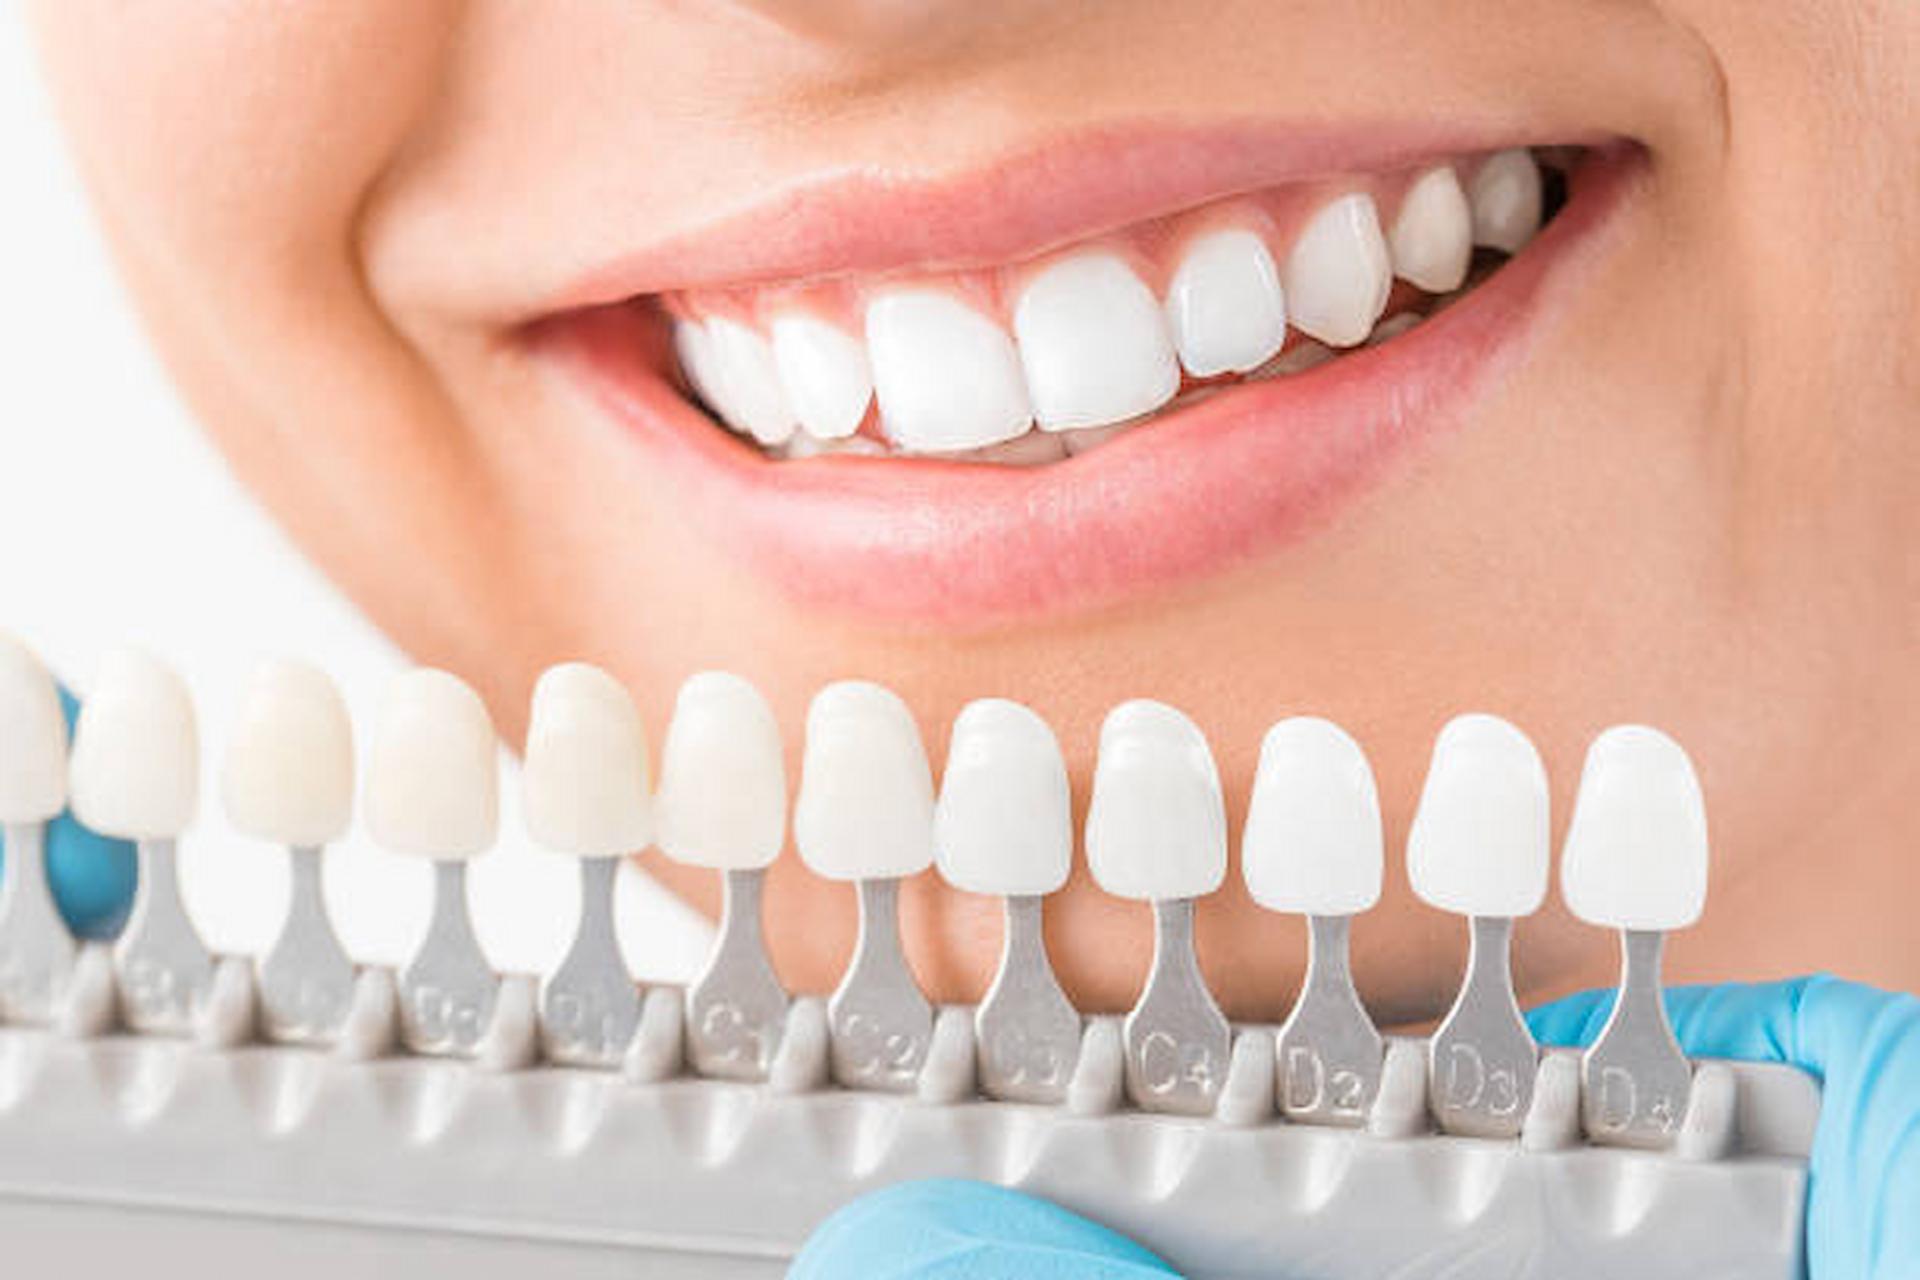 Why Are Cosmetic Dental Treatments So Popular?